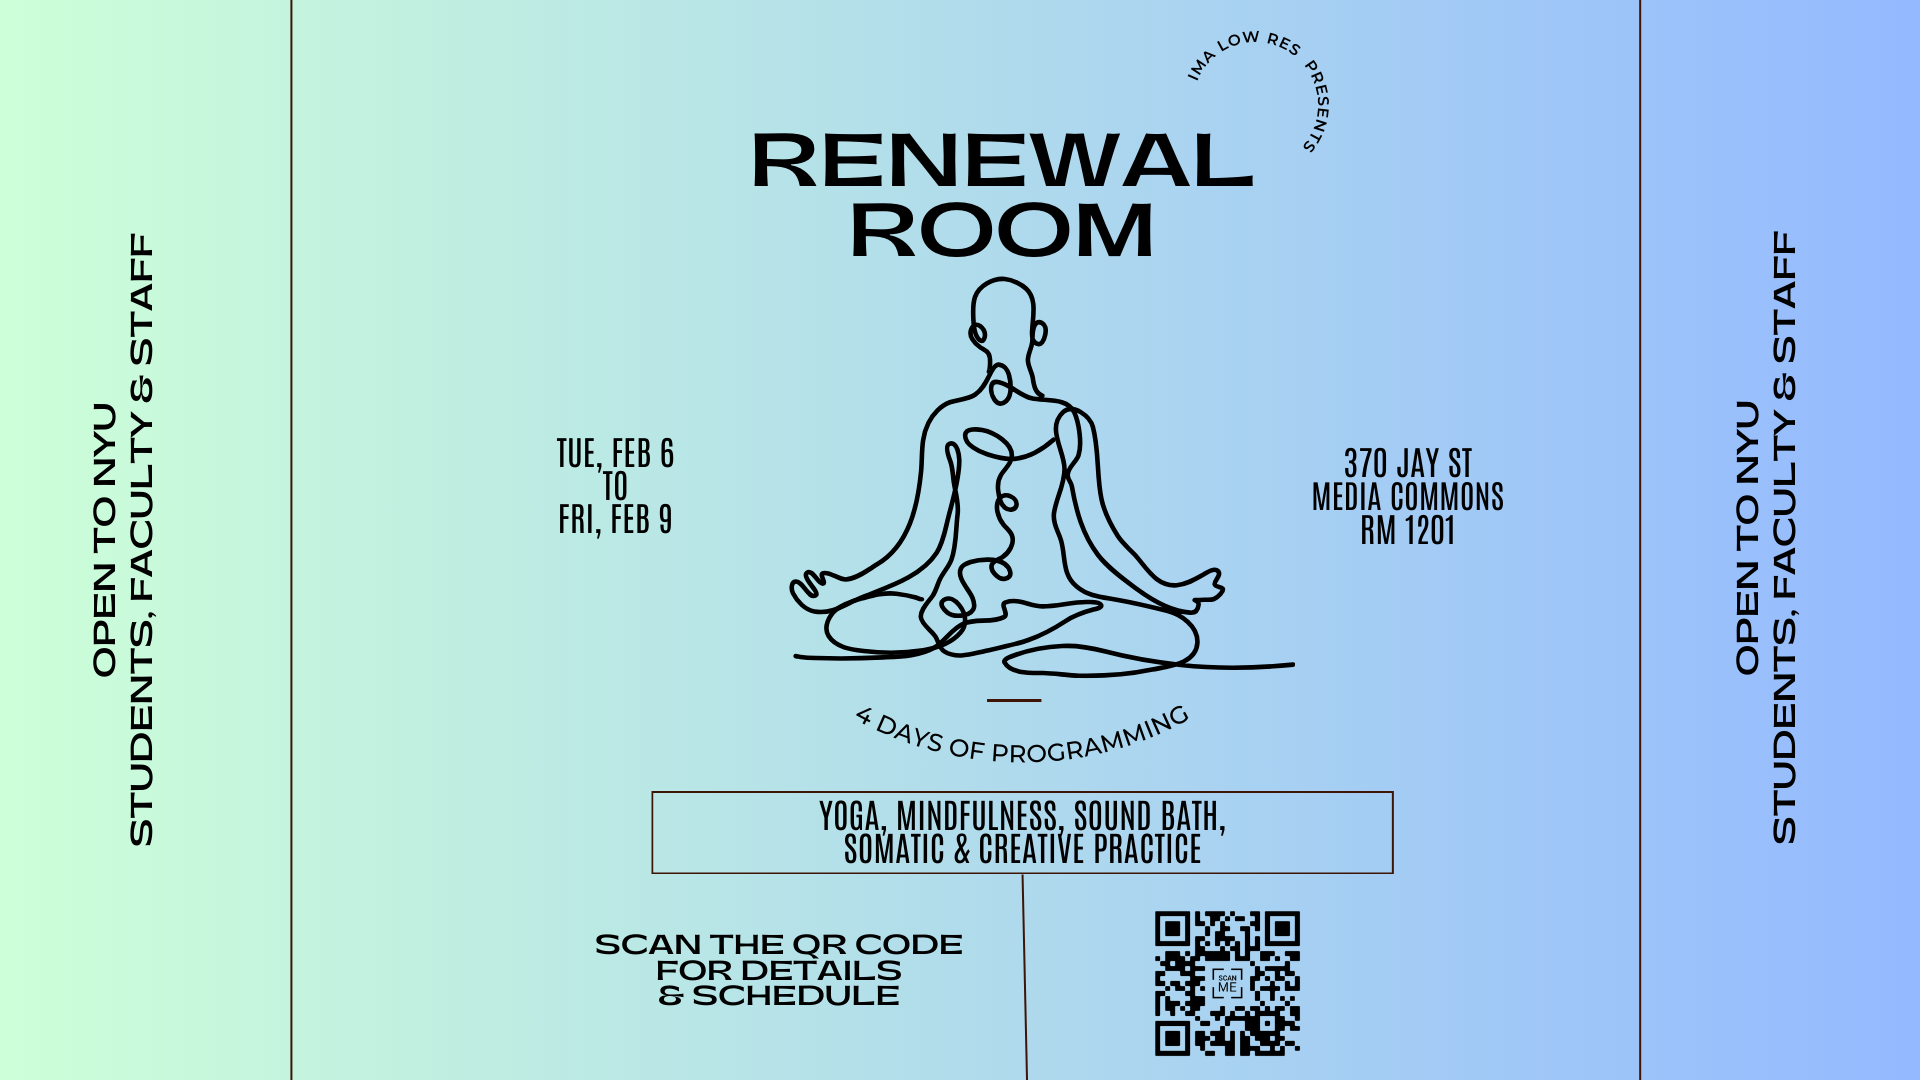 Promotional poster for the Renewal Room.